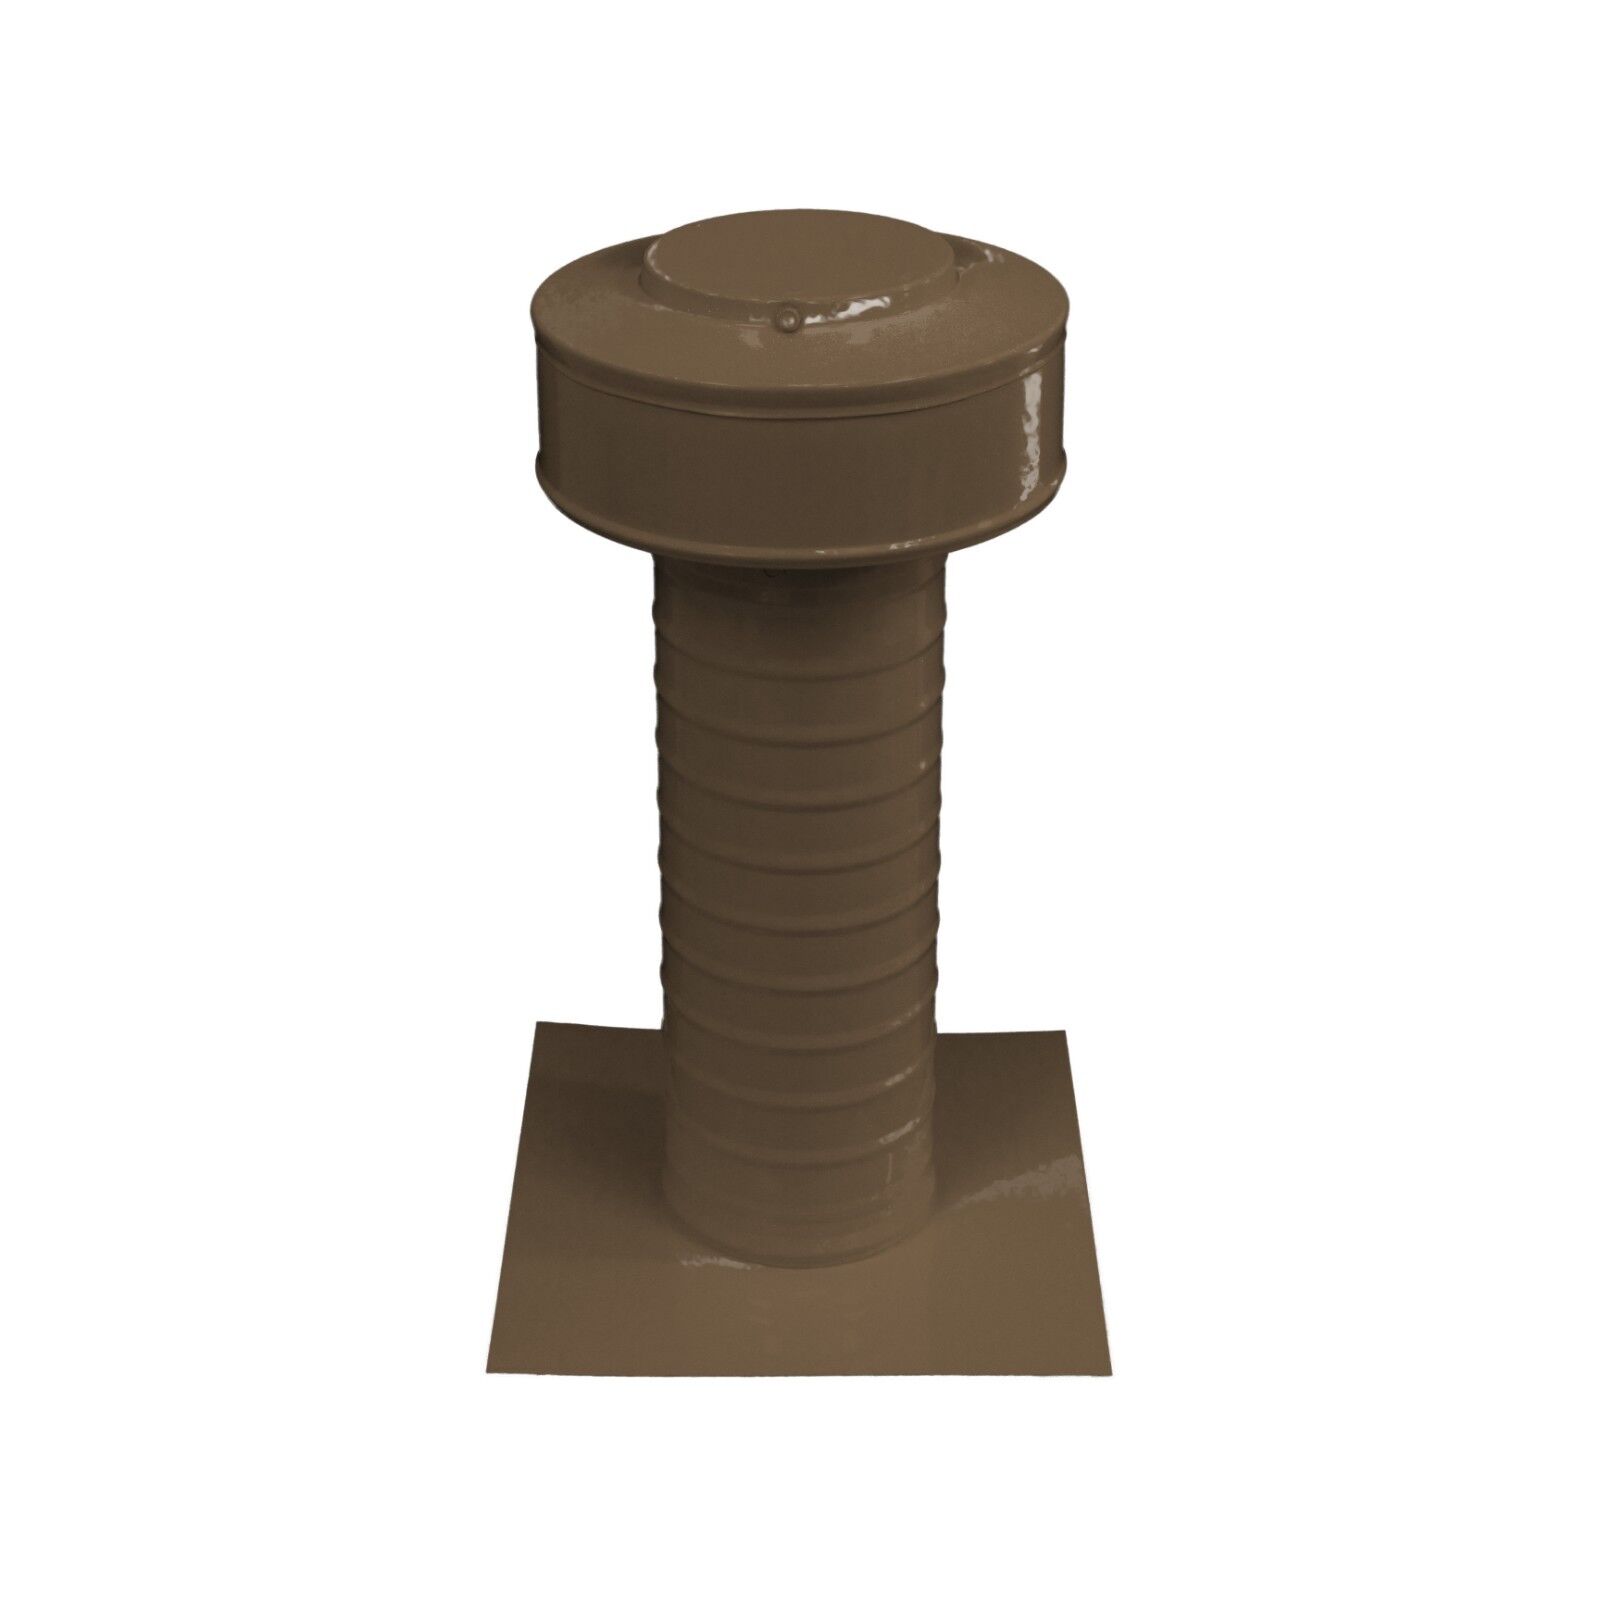 4 Inch Diameter Keepa Vent An Aluminum Roof Vent For Flat Roofs In Brown